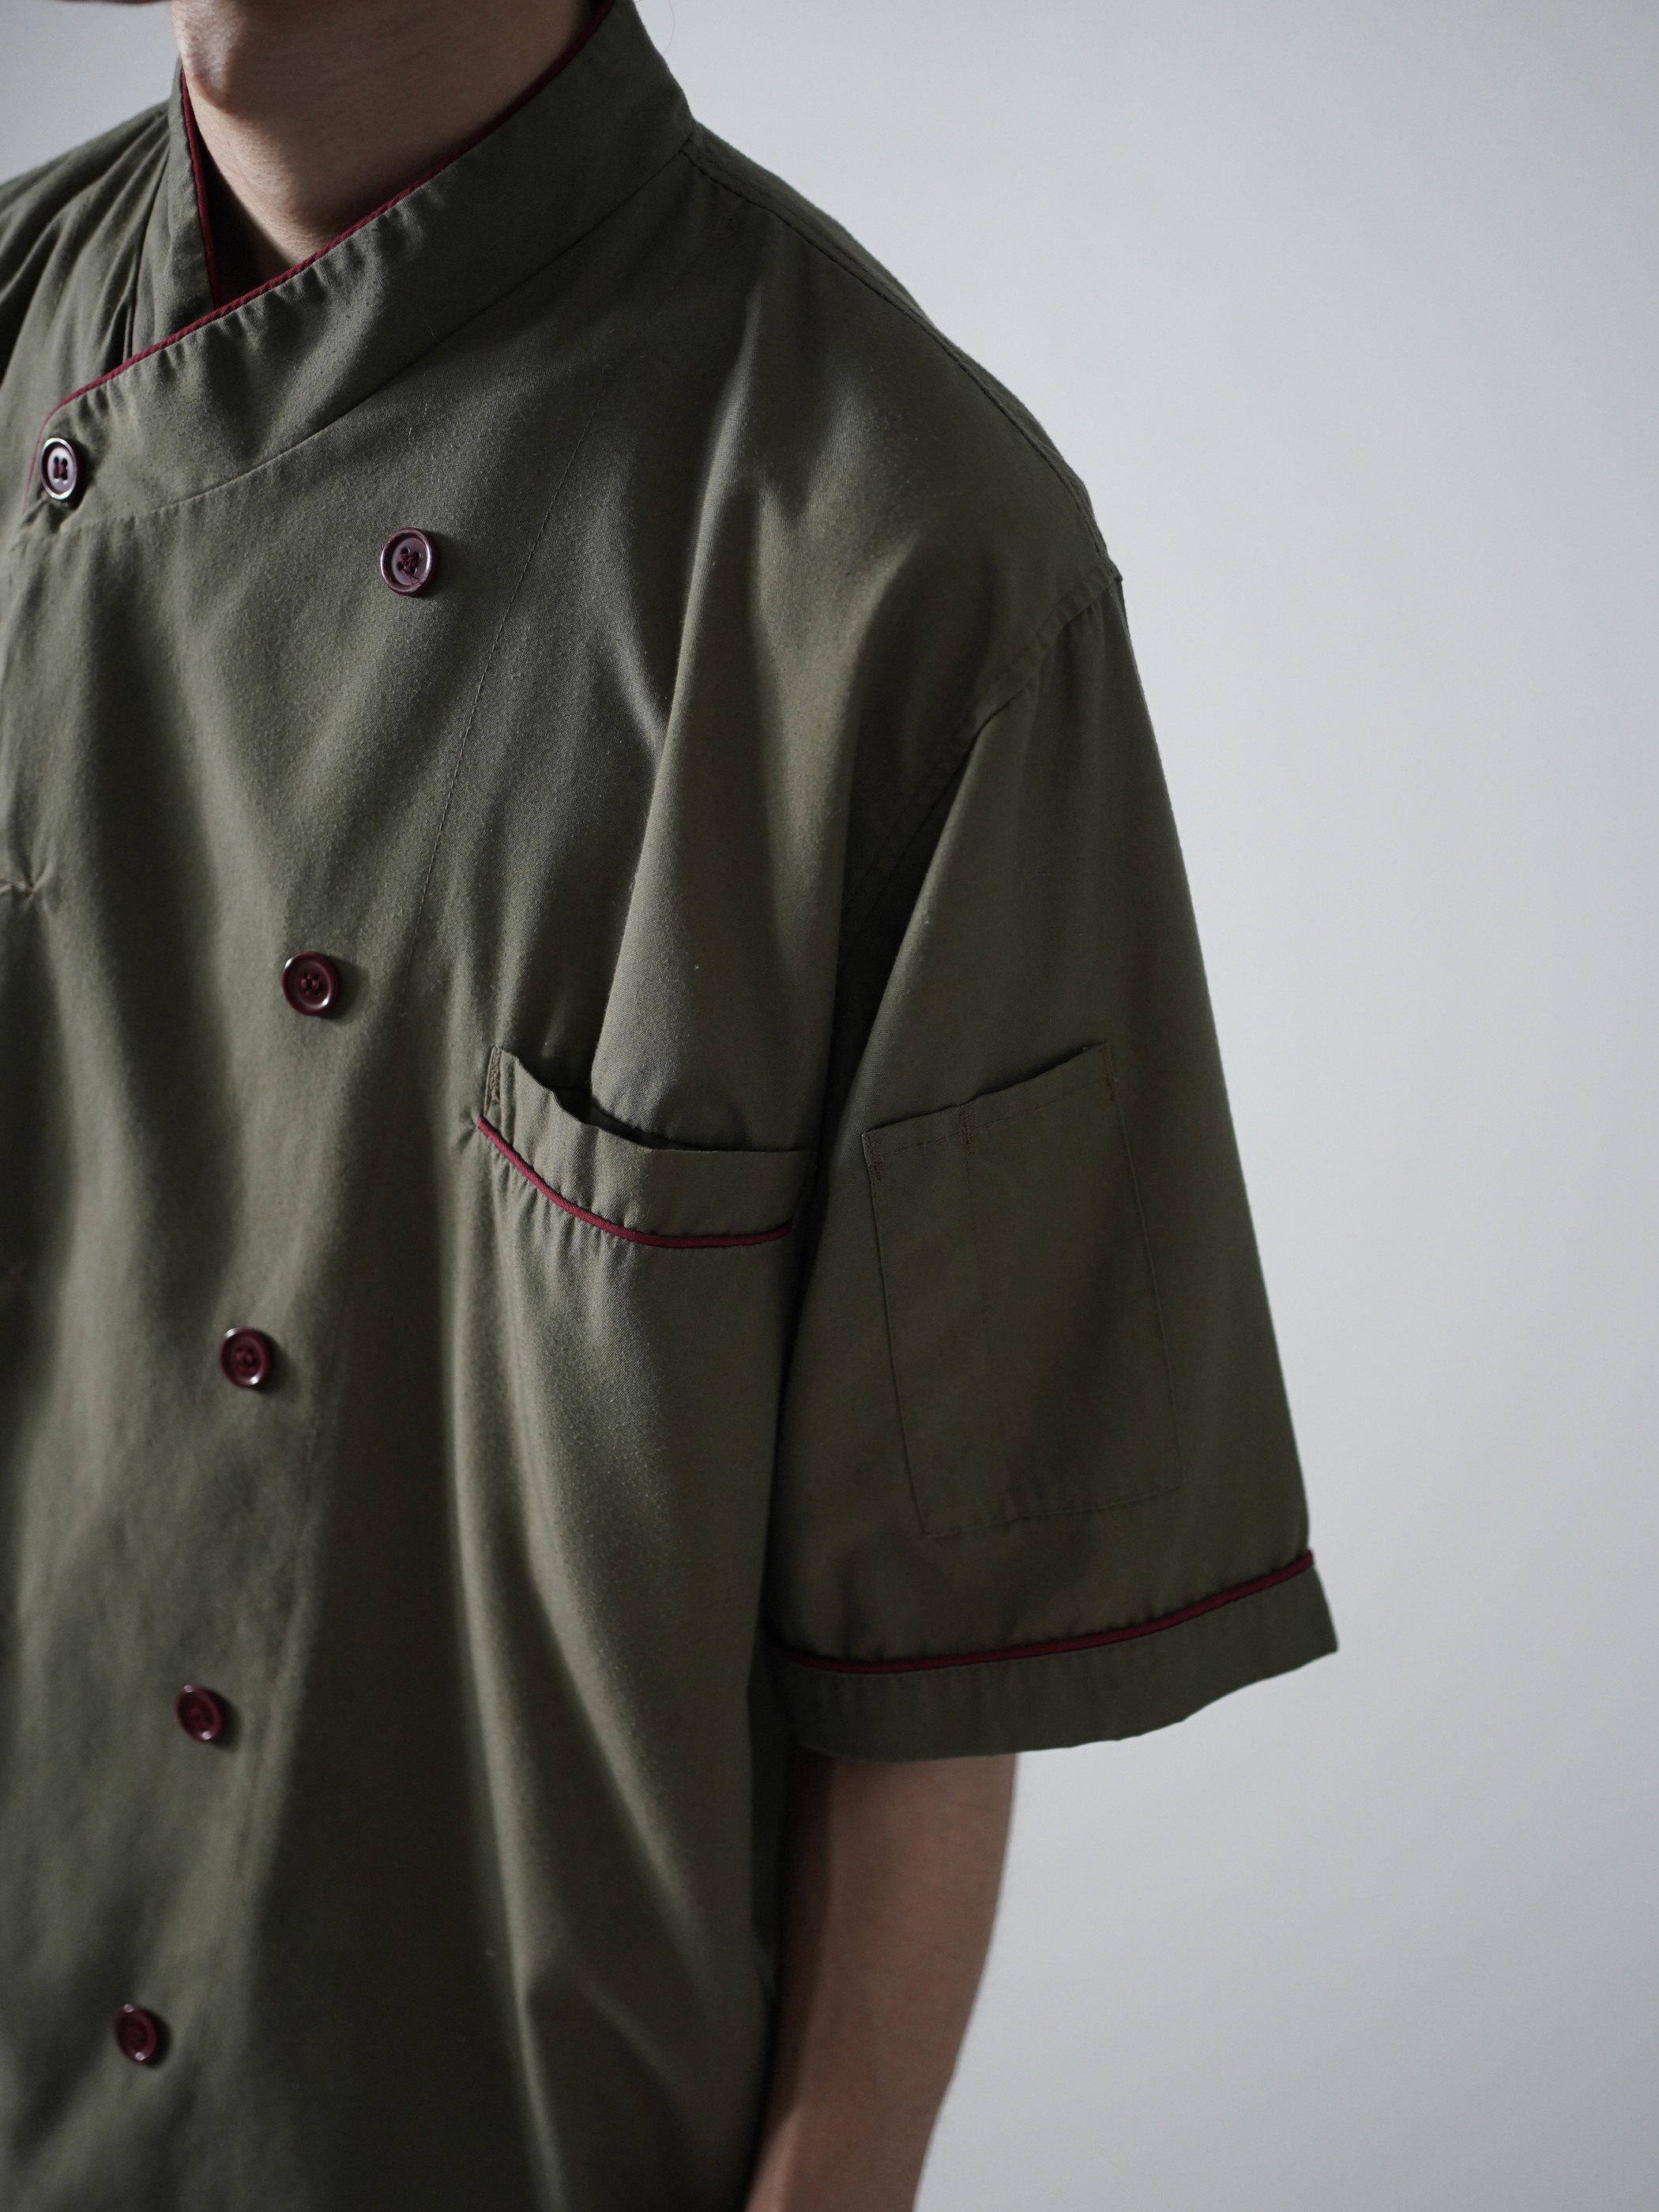 S/S Double-breasted design Chef shirts